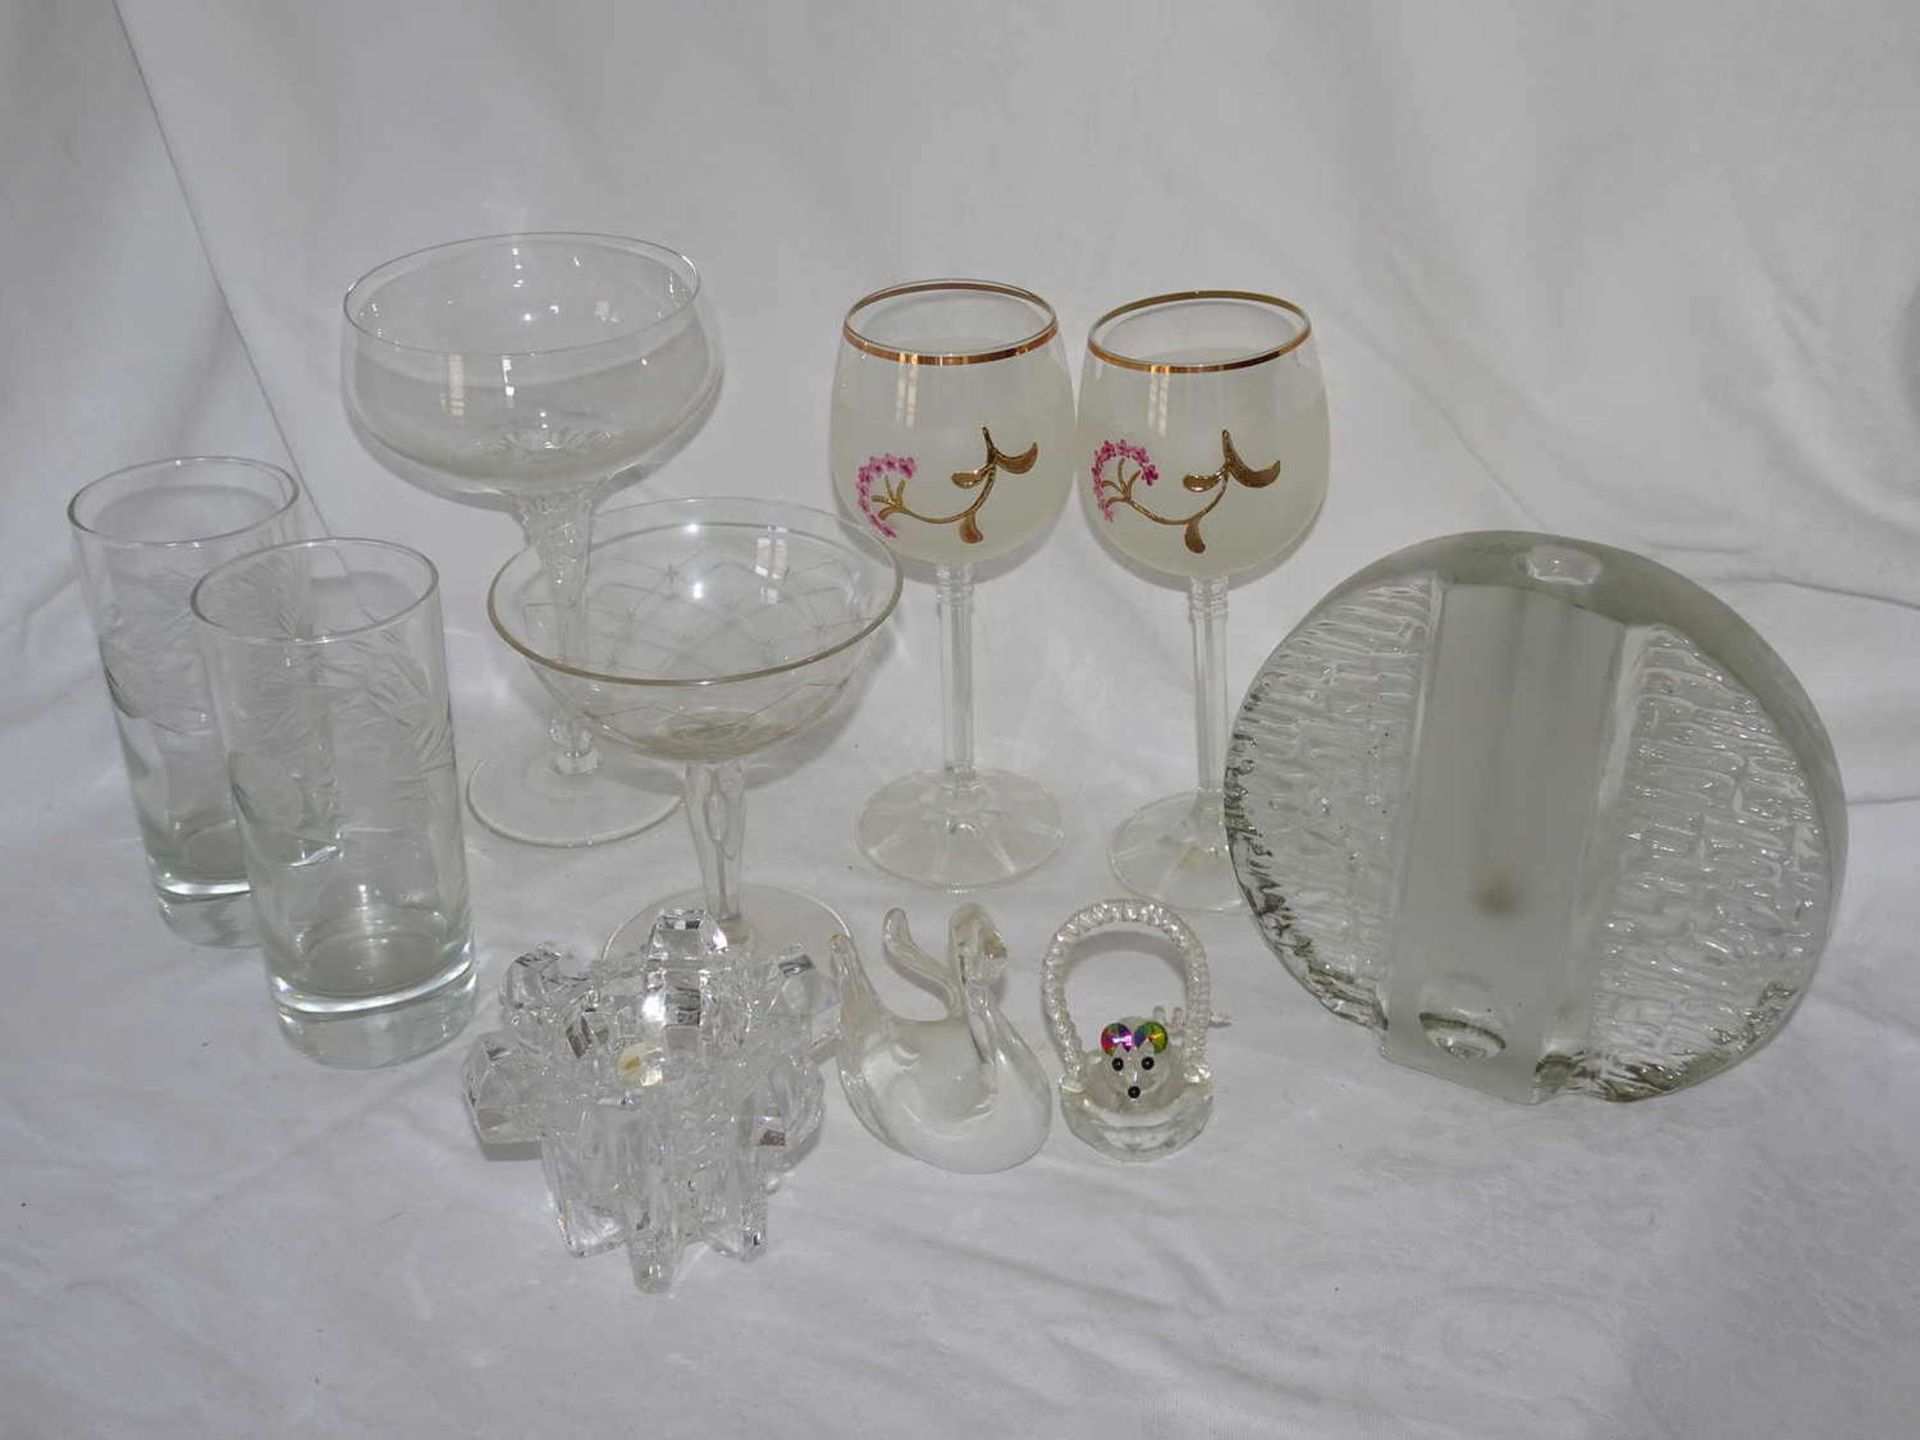 Lot of glass from household dissolution, including water glasses, glass vase, lead crystal lidded